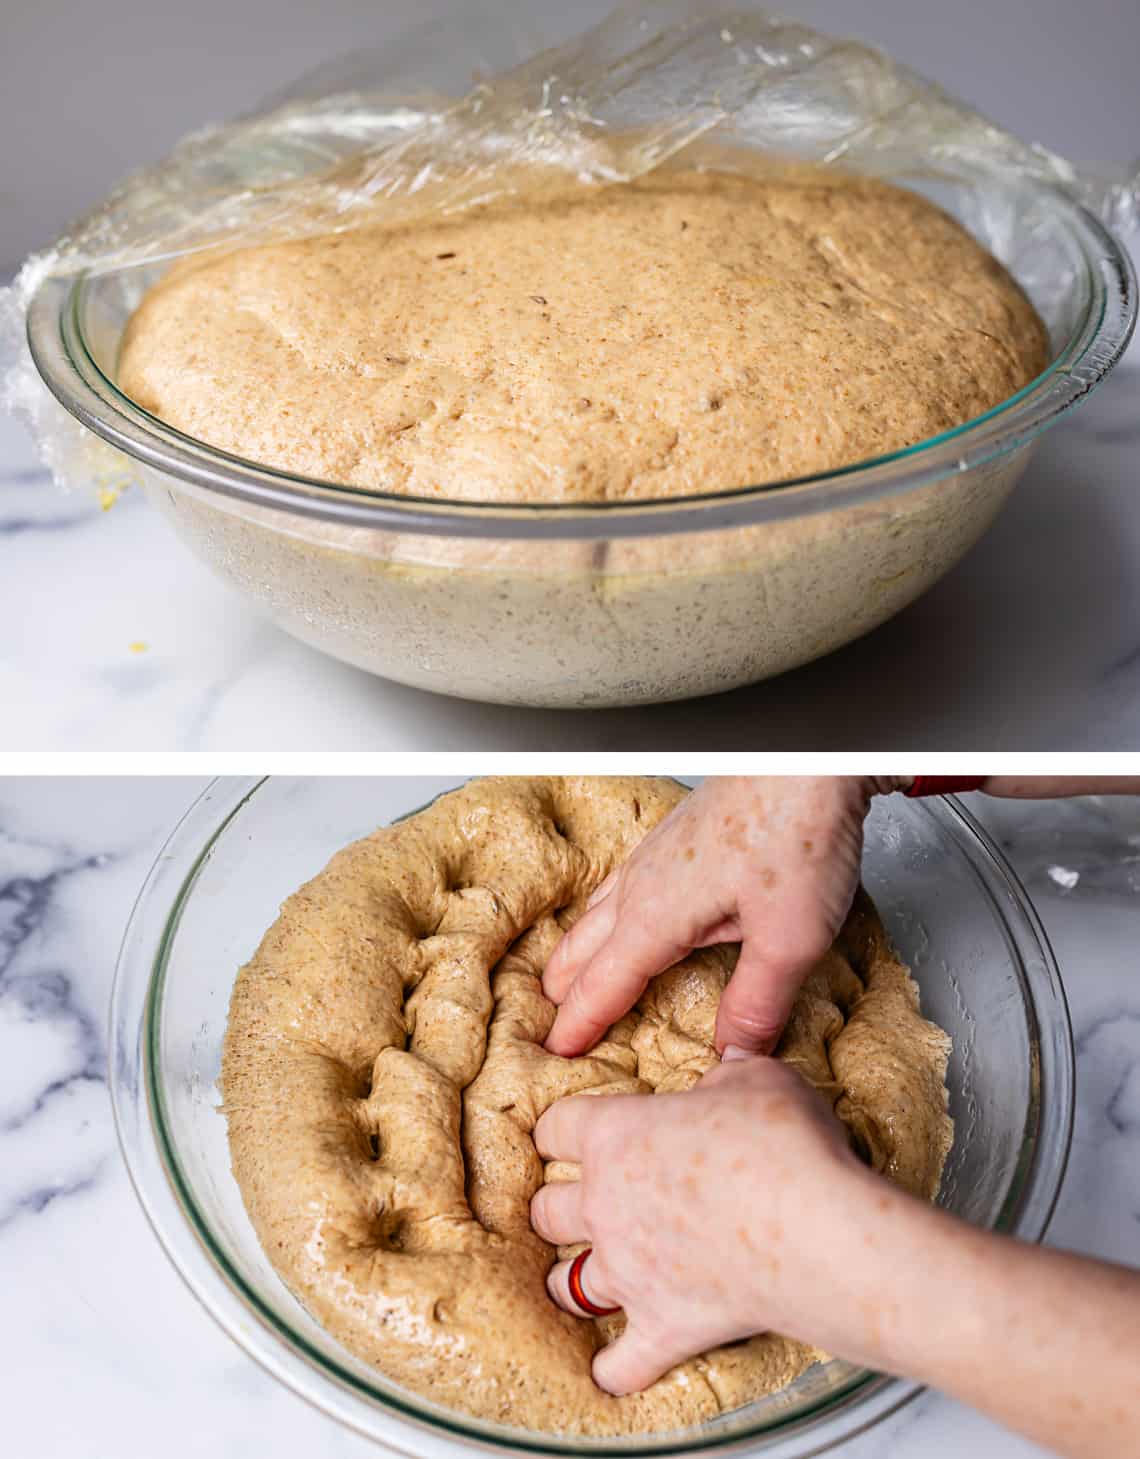 top risen dough in glass bowl with plastic wrap off, bottom using fingers to press down dough.